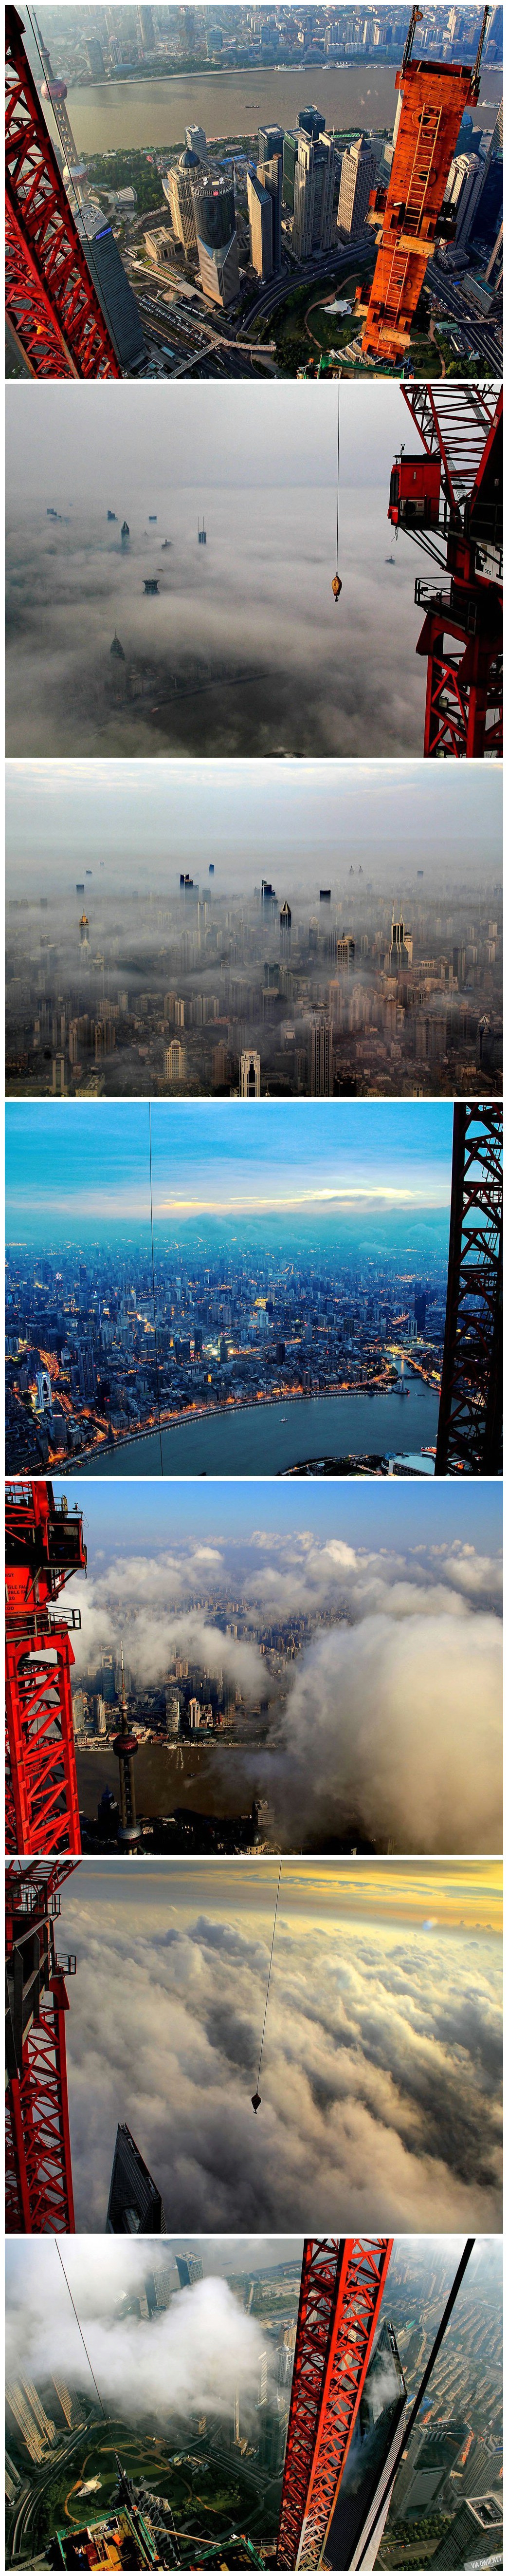 Crane operator who works in Chinese capital city Shanghai shared the views he sees everyday at his workplace.